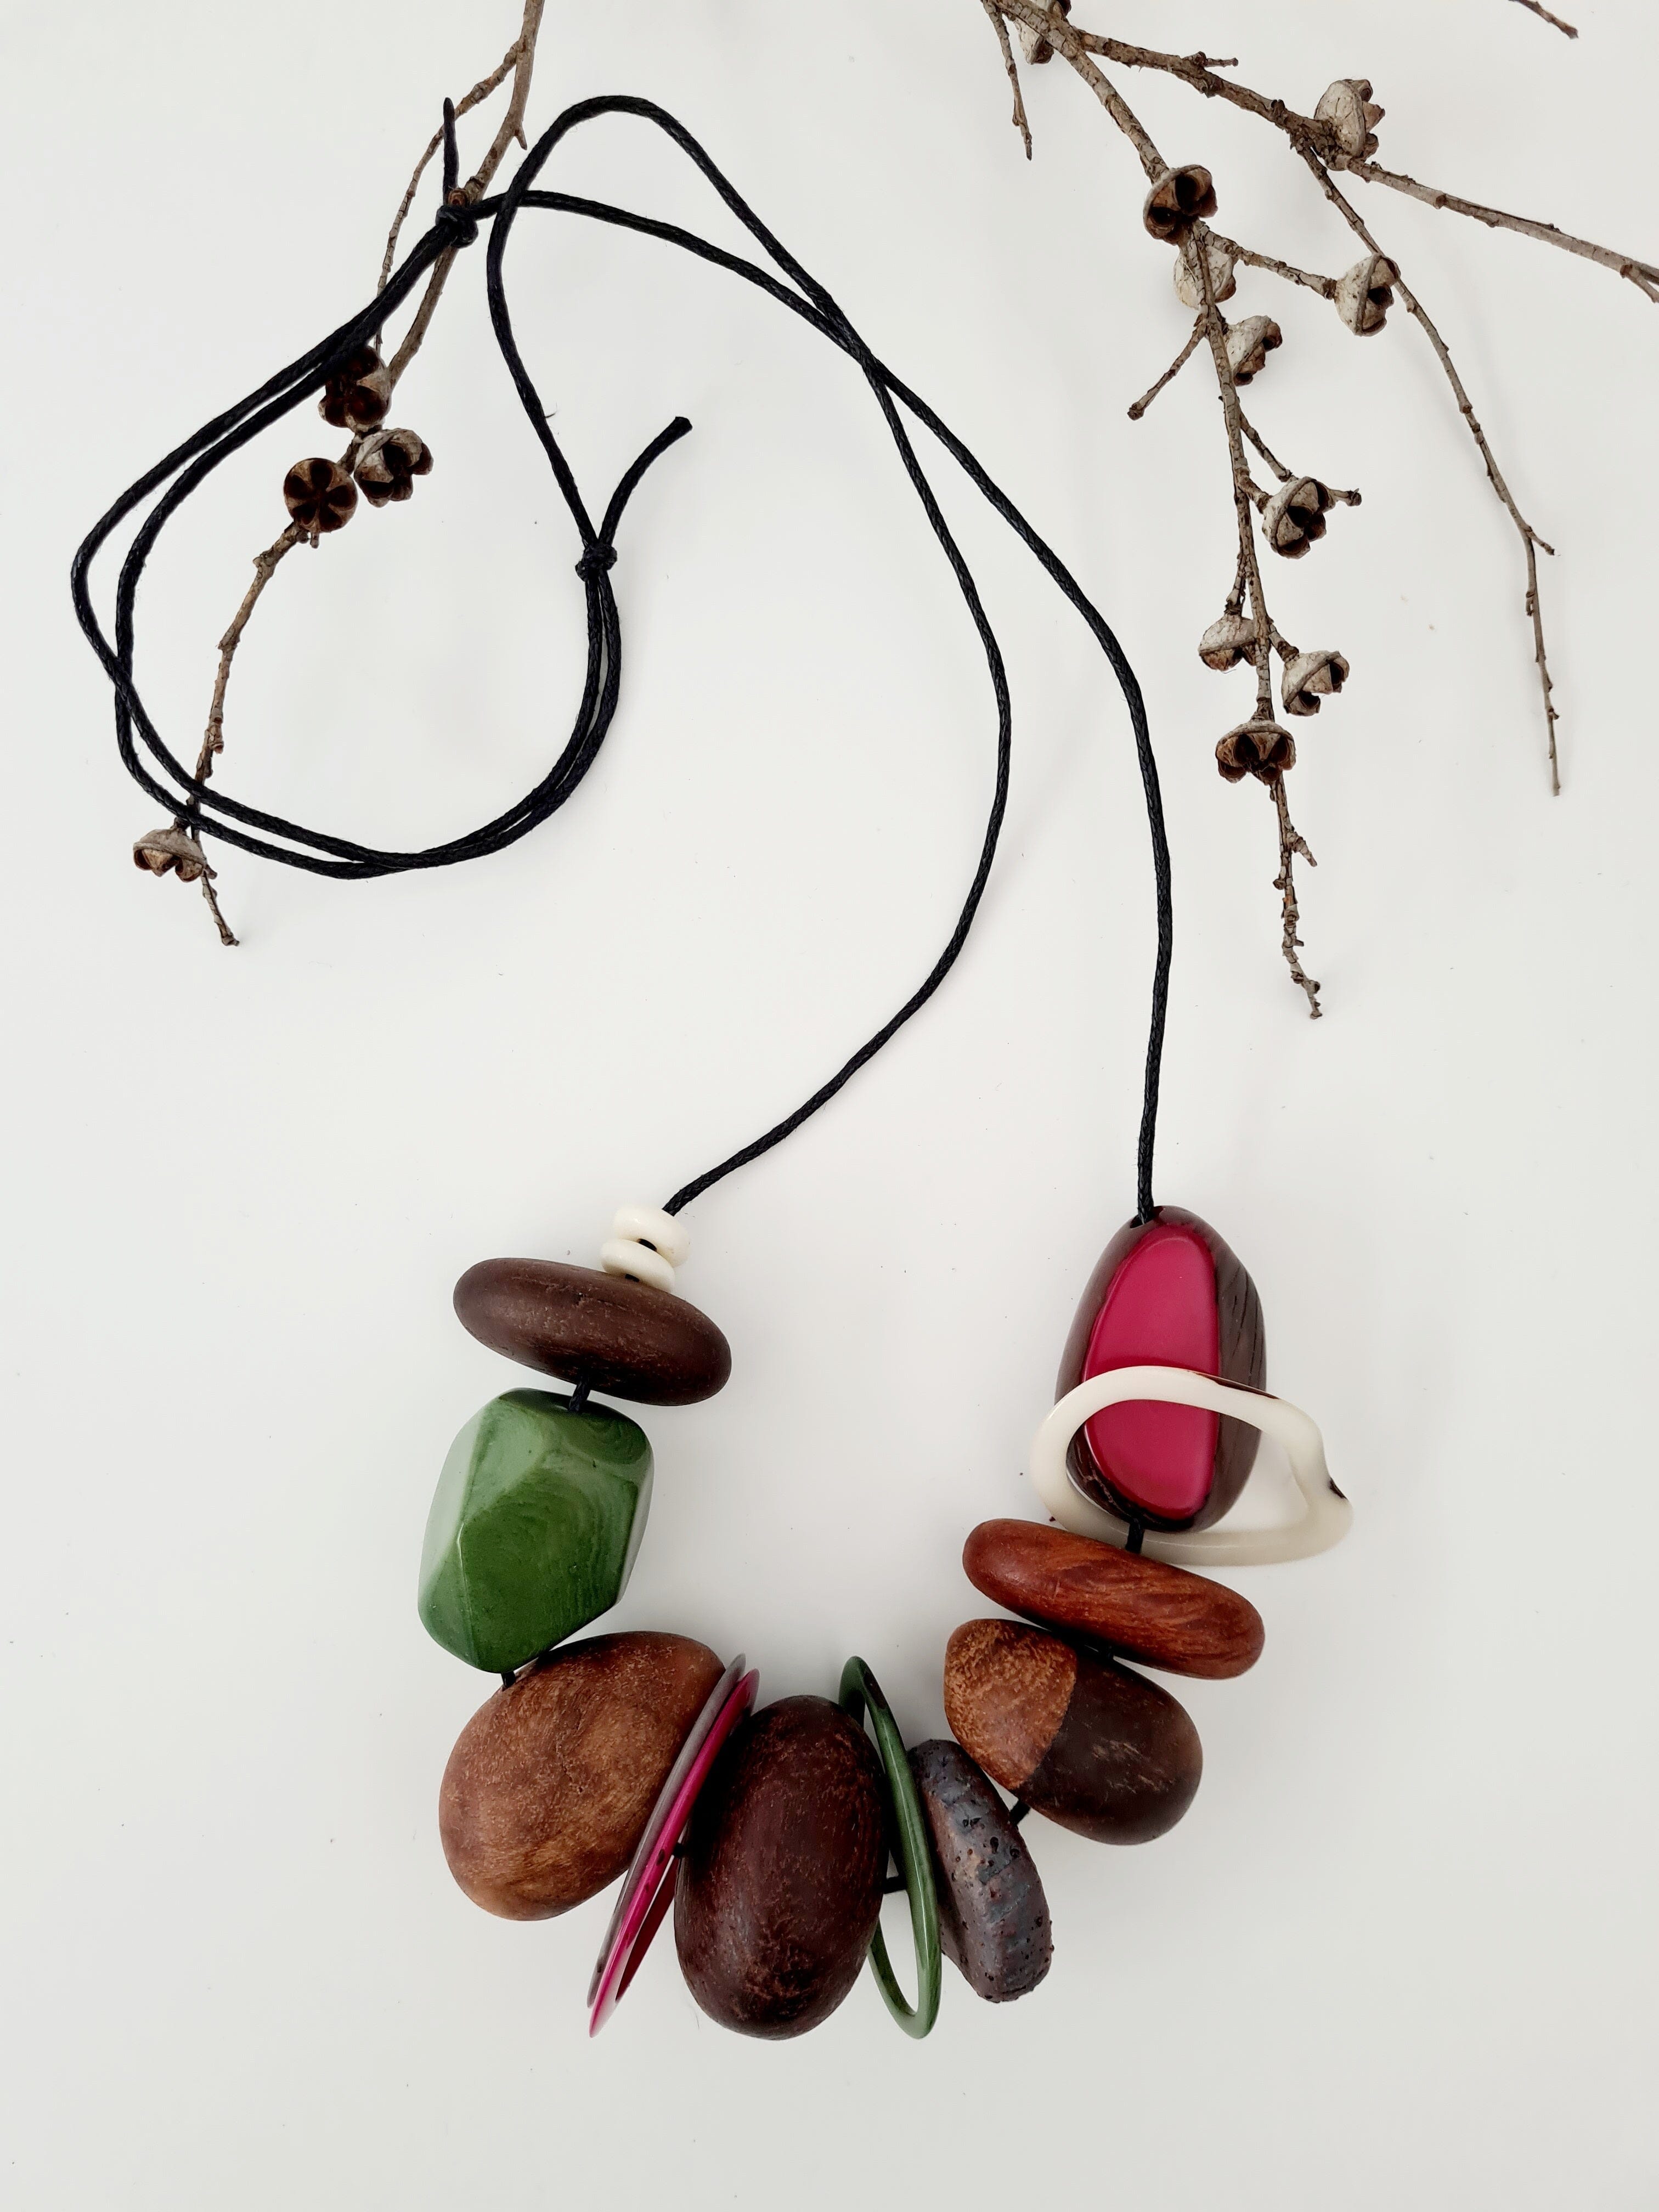 Eco Beads Necklaces Eco Beads The Spotted Quoll Boom Shake the Room 